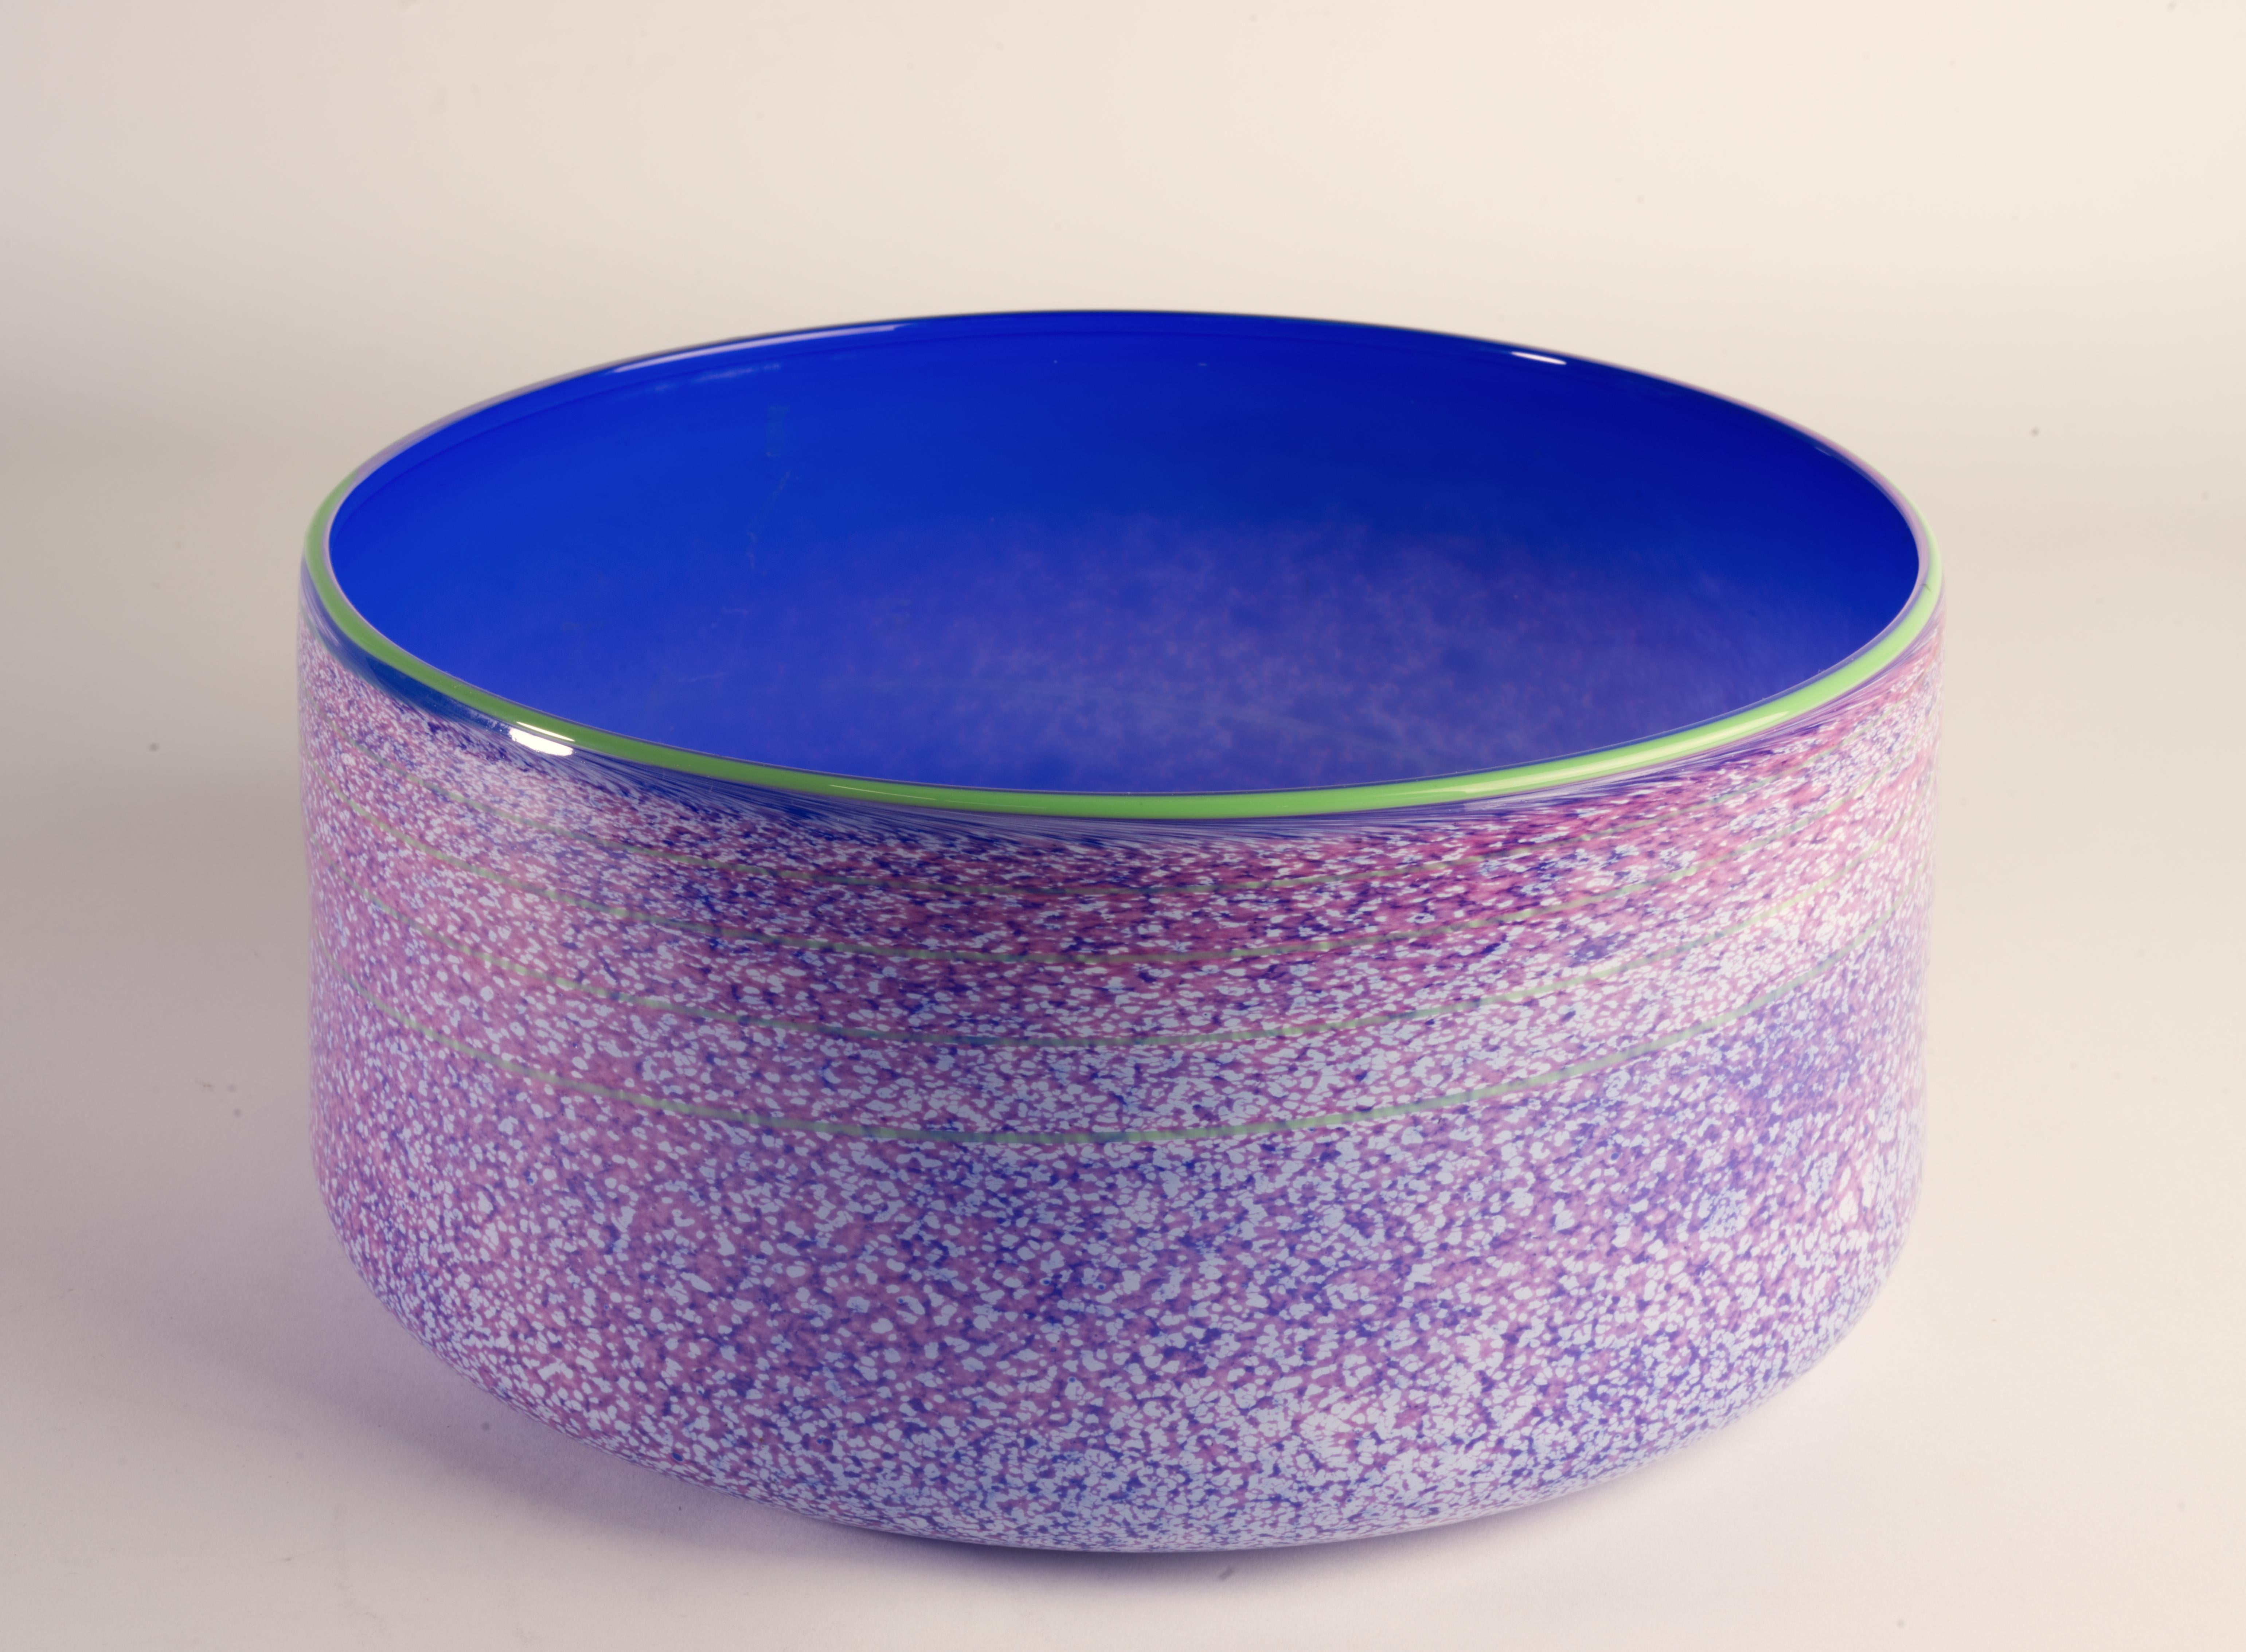 Hand blown art glass bowl has speckled exterior in shades of off-white, burgundy, and light blue, separated by light green rim from cobalt blue interior. A thin green line swirls throughout the piece, guiding the eye and adding movement and interest